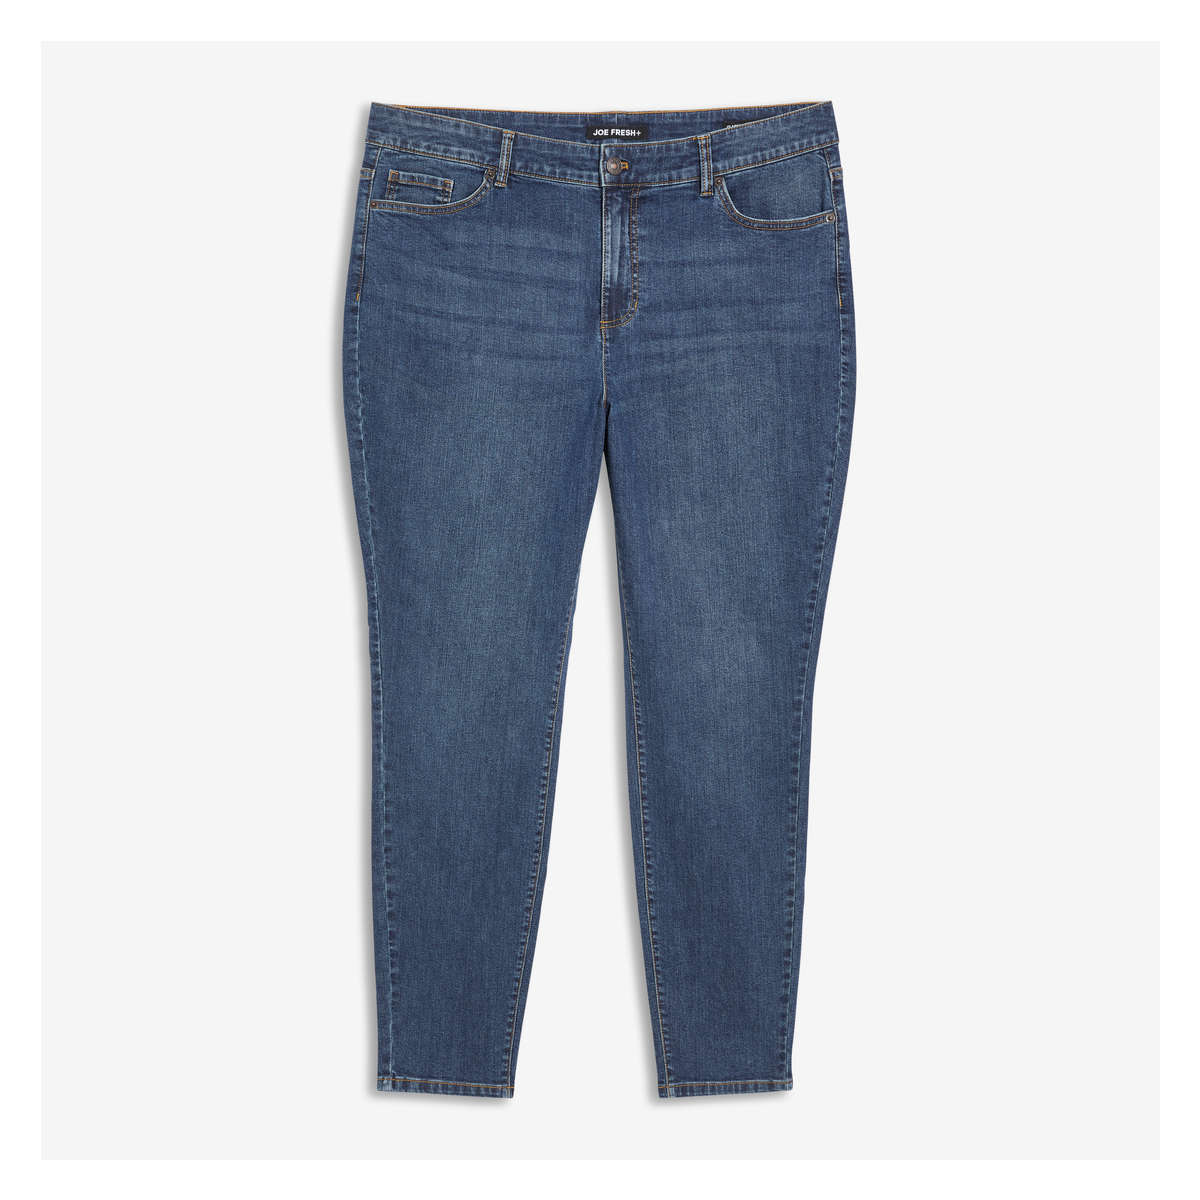 Buy Cassie Mid Rise Slim Straight Leg Jeans for CAD 61.00